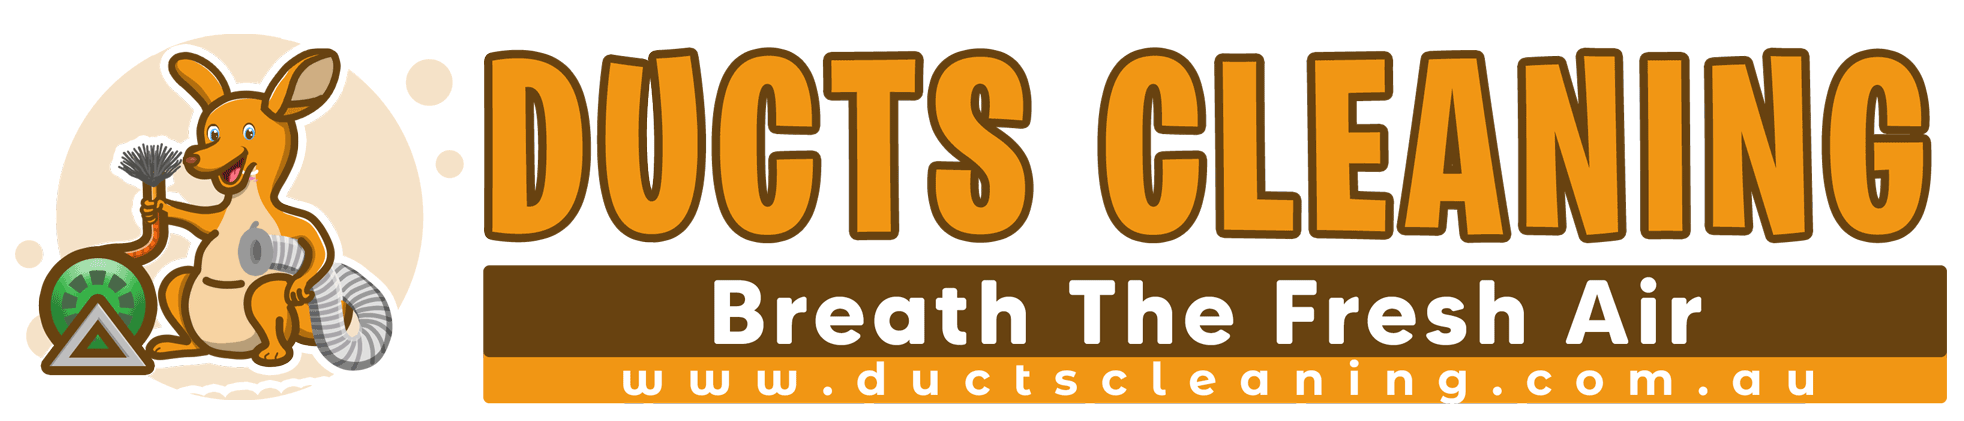 Ducts Cleaning